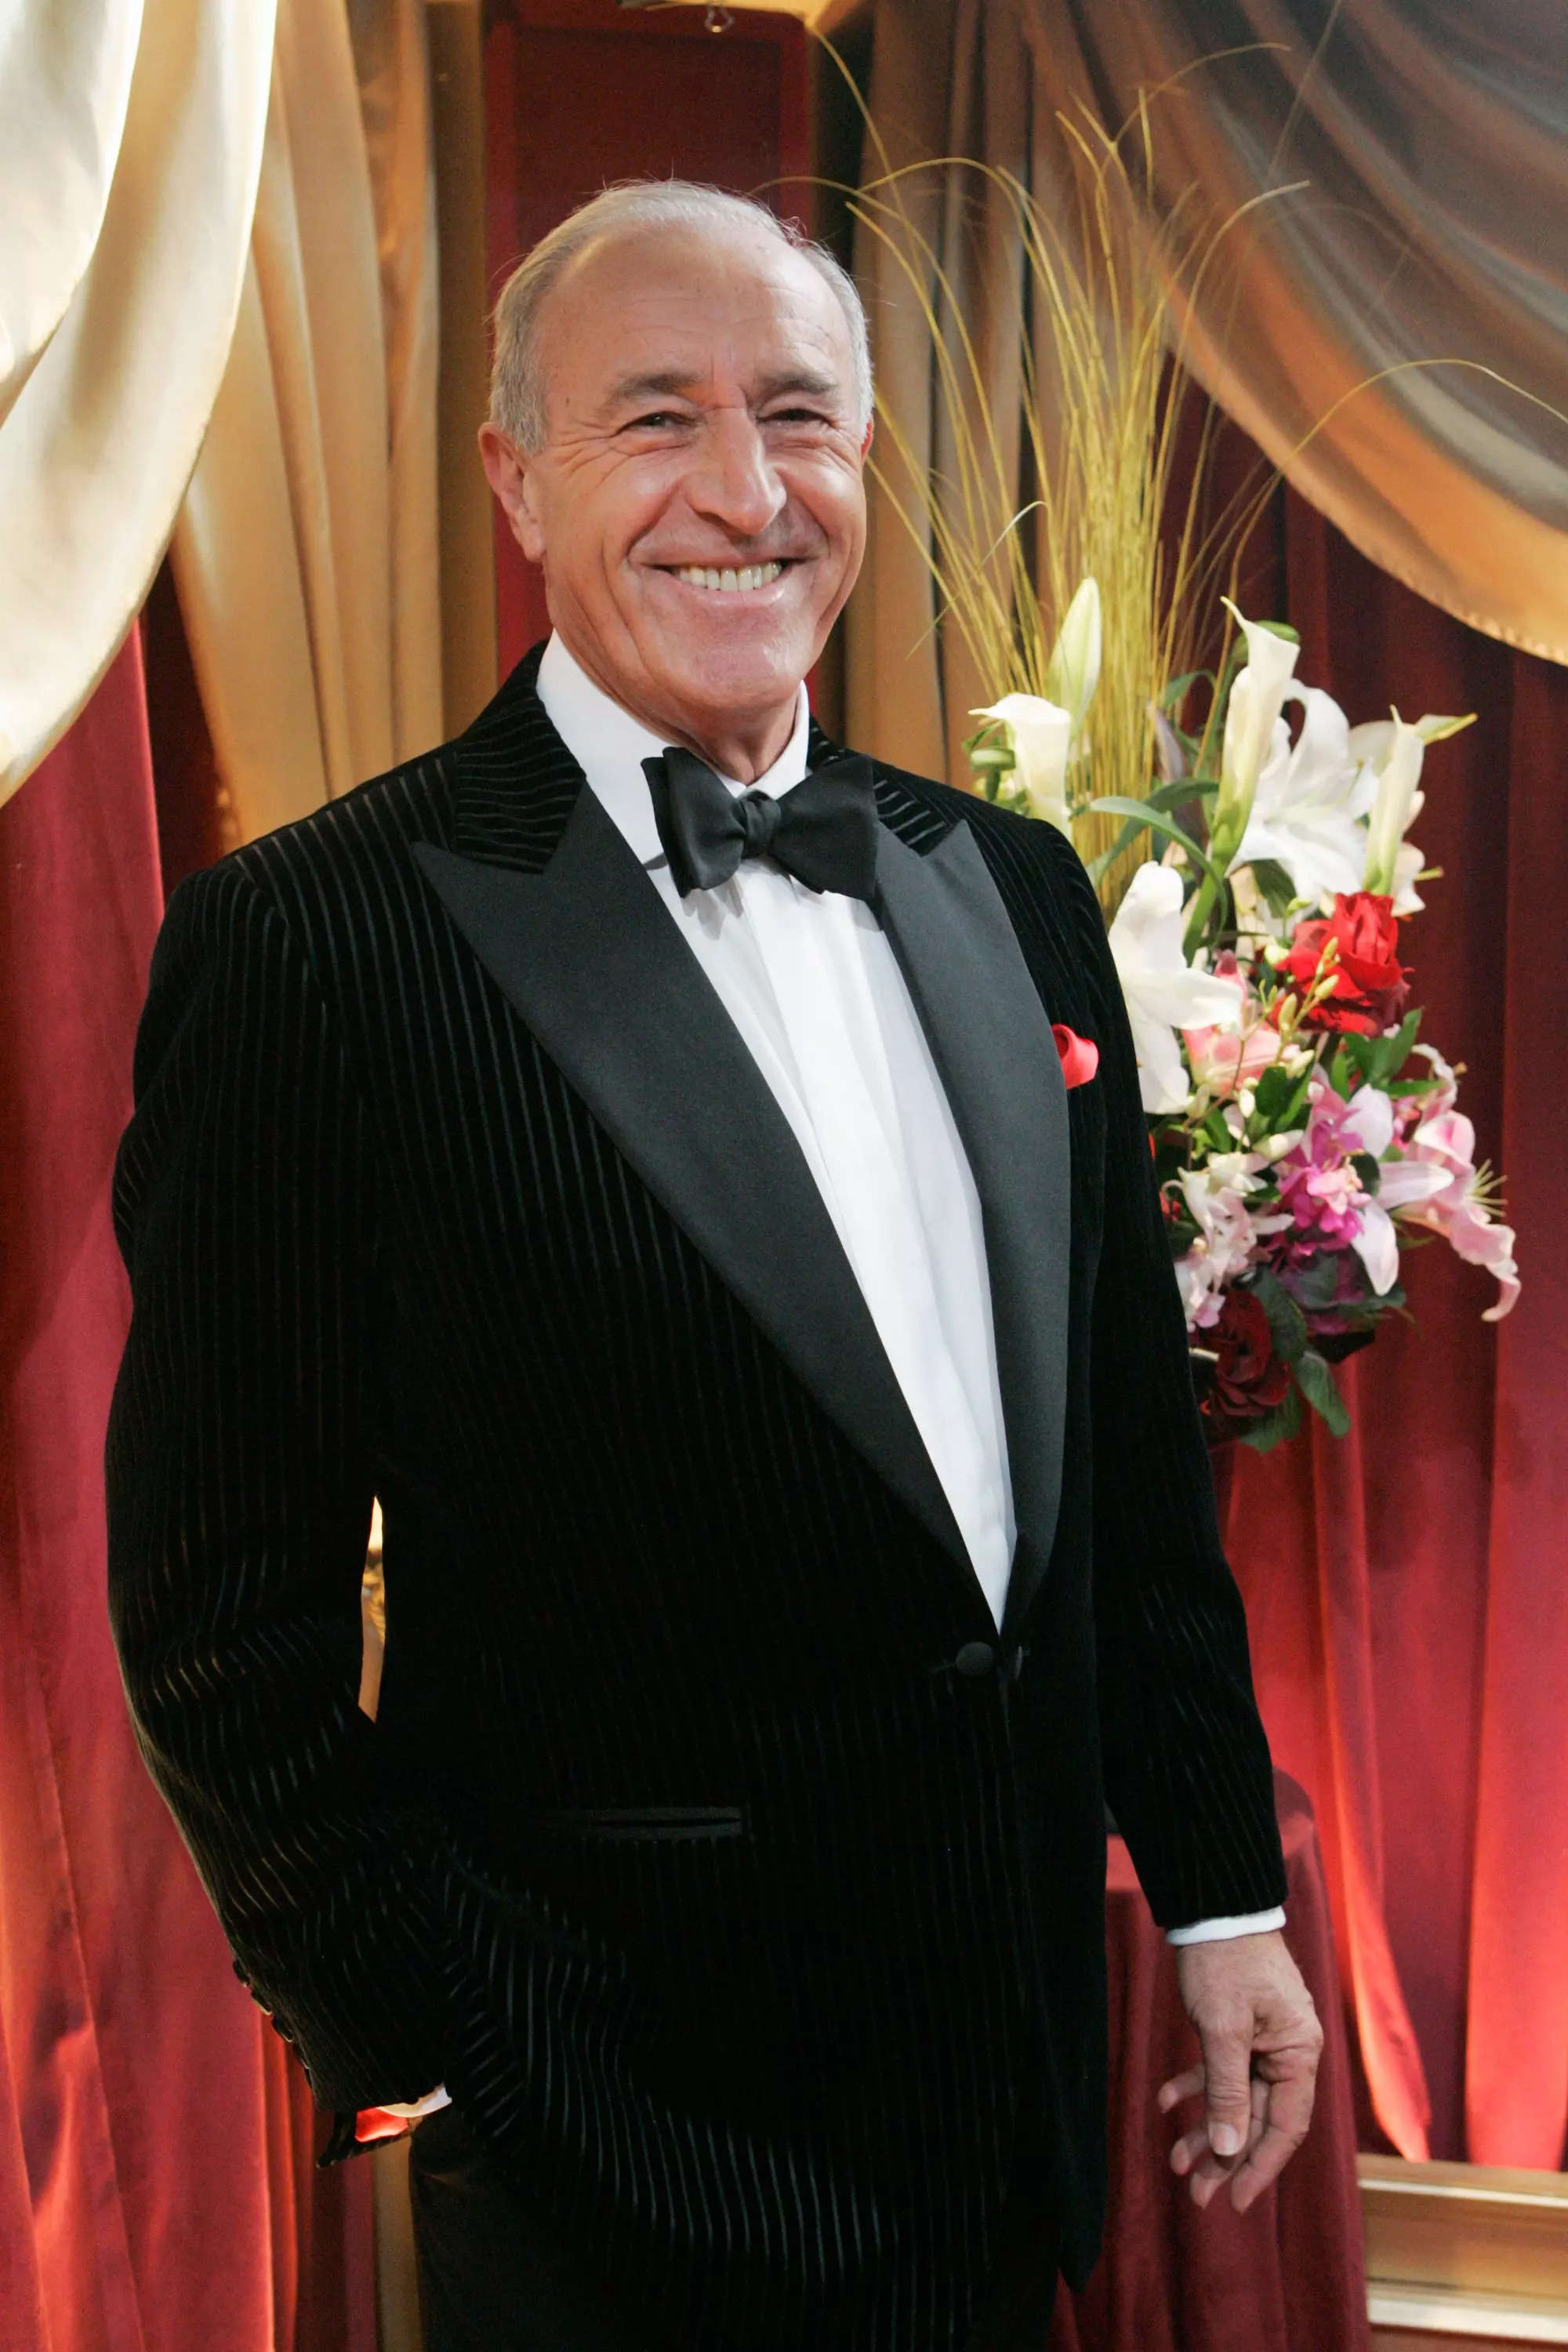 Len Goodman served as head judge on "DWTS" for more than 15 years and 30 seasons.